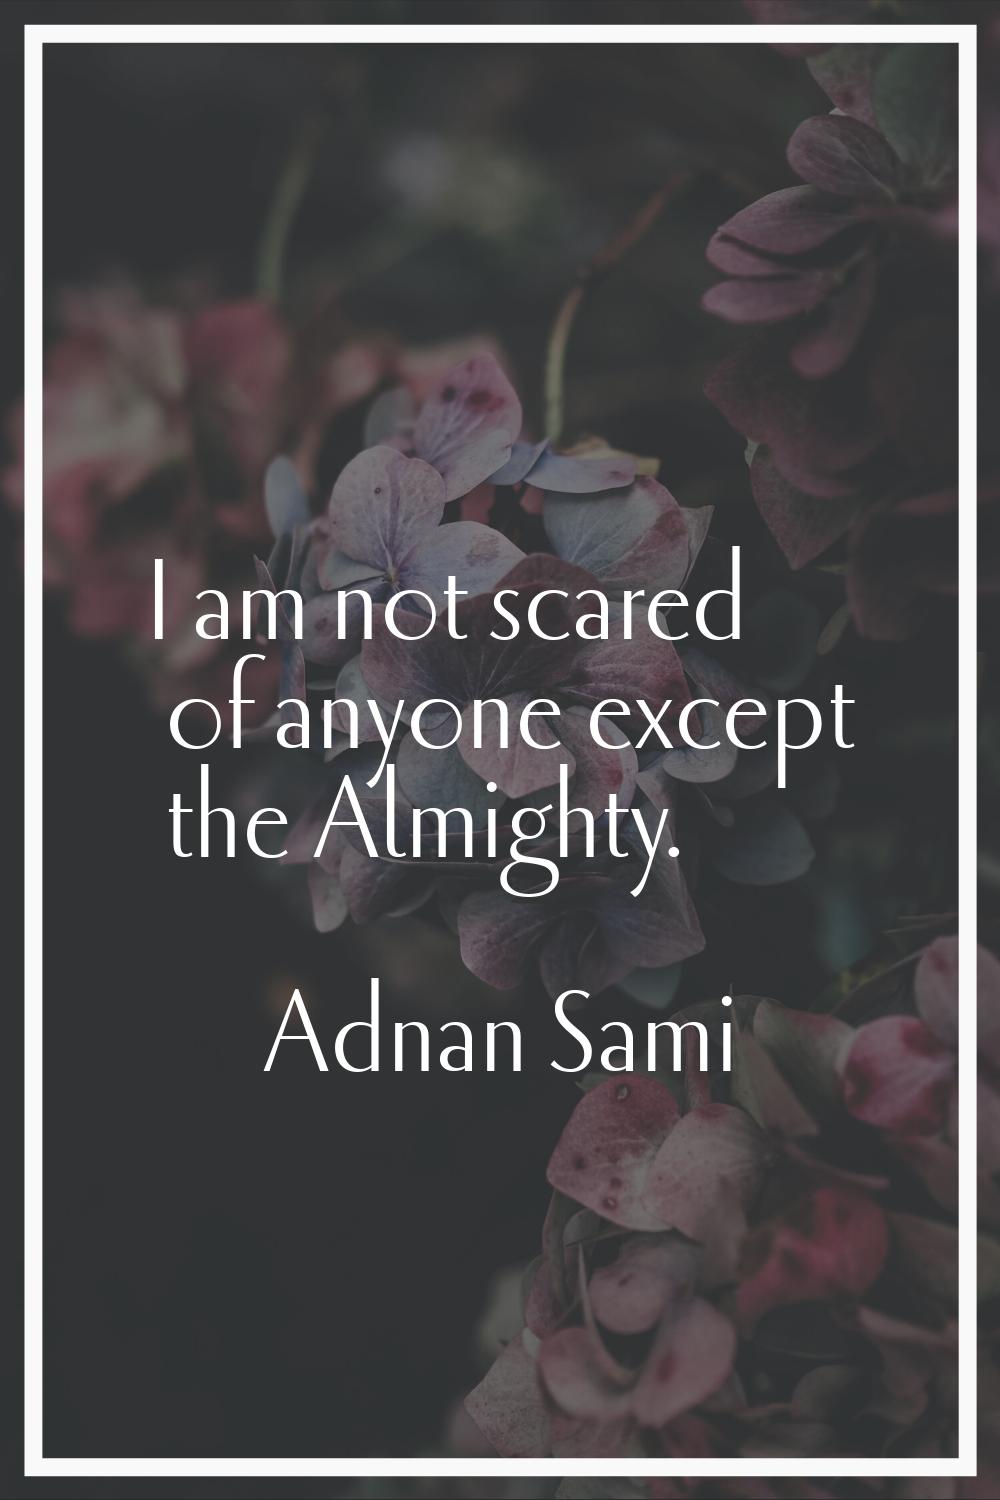 I am not scared of anyone except the Almighty.